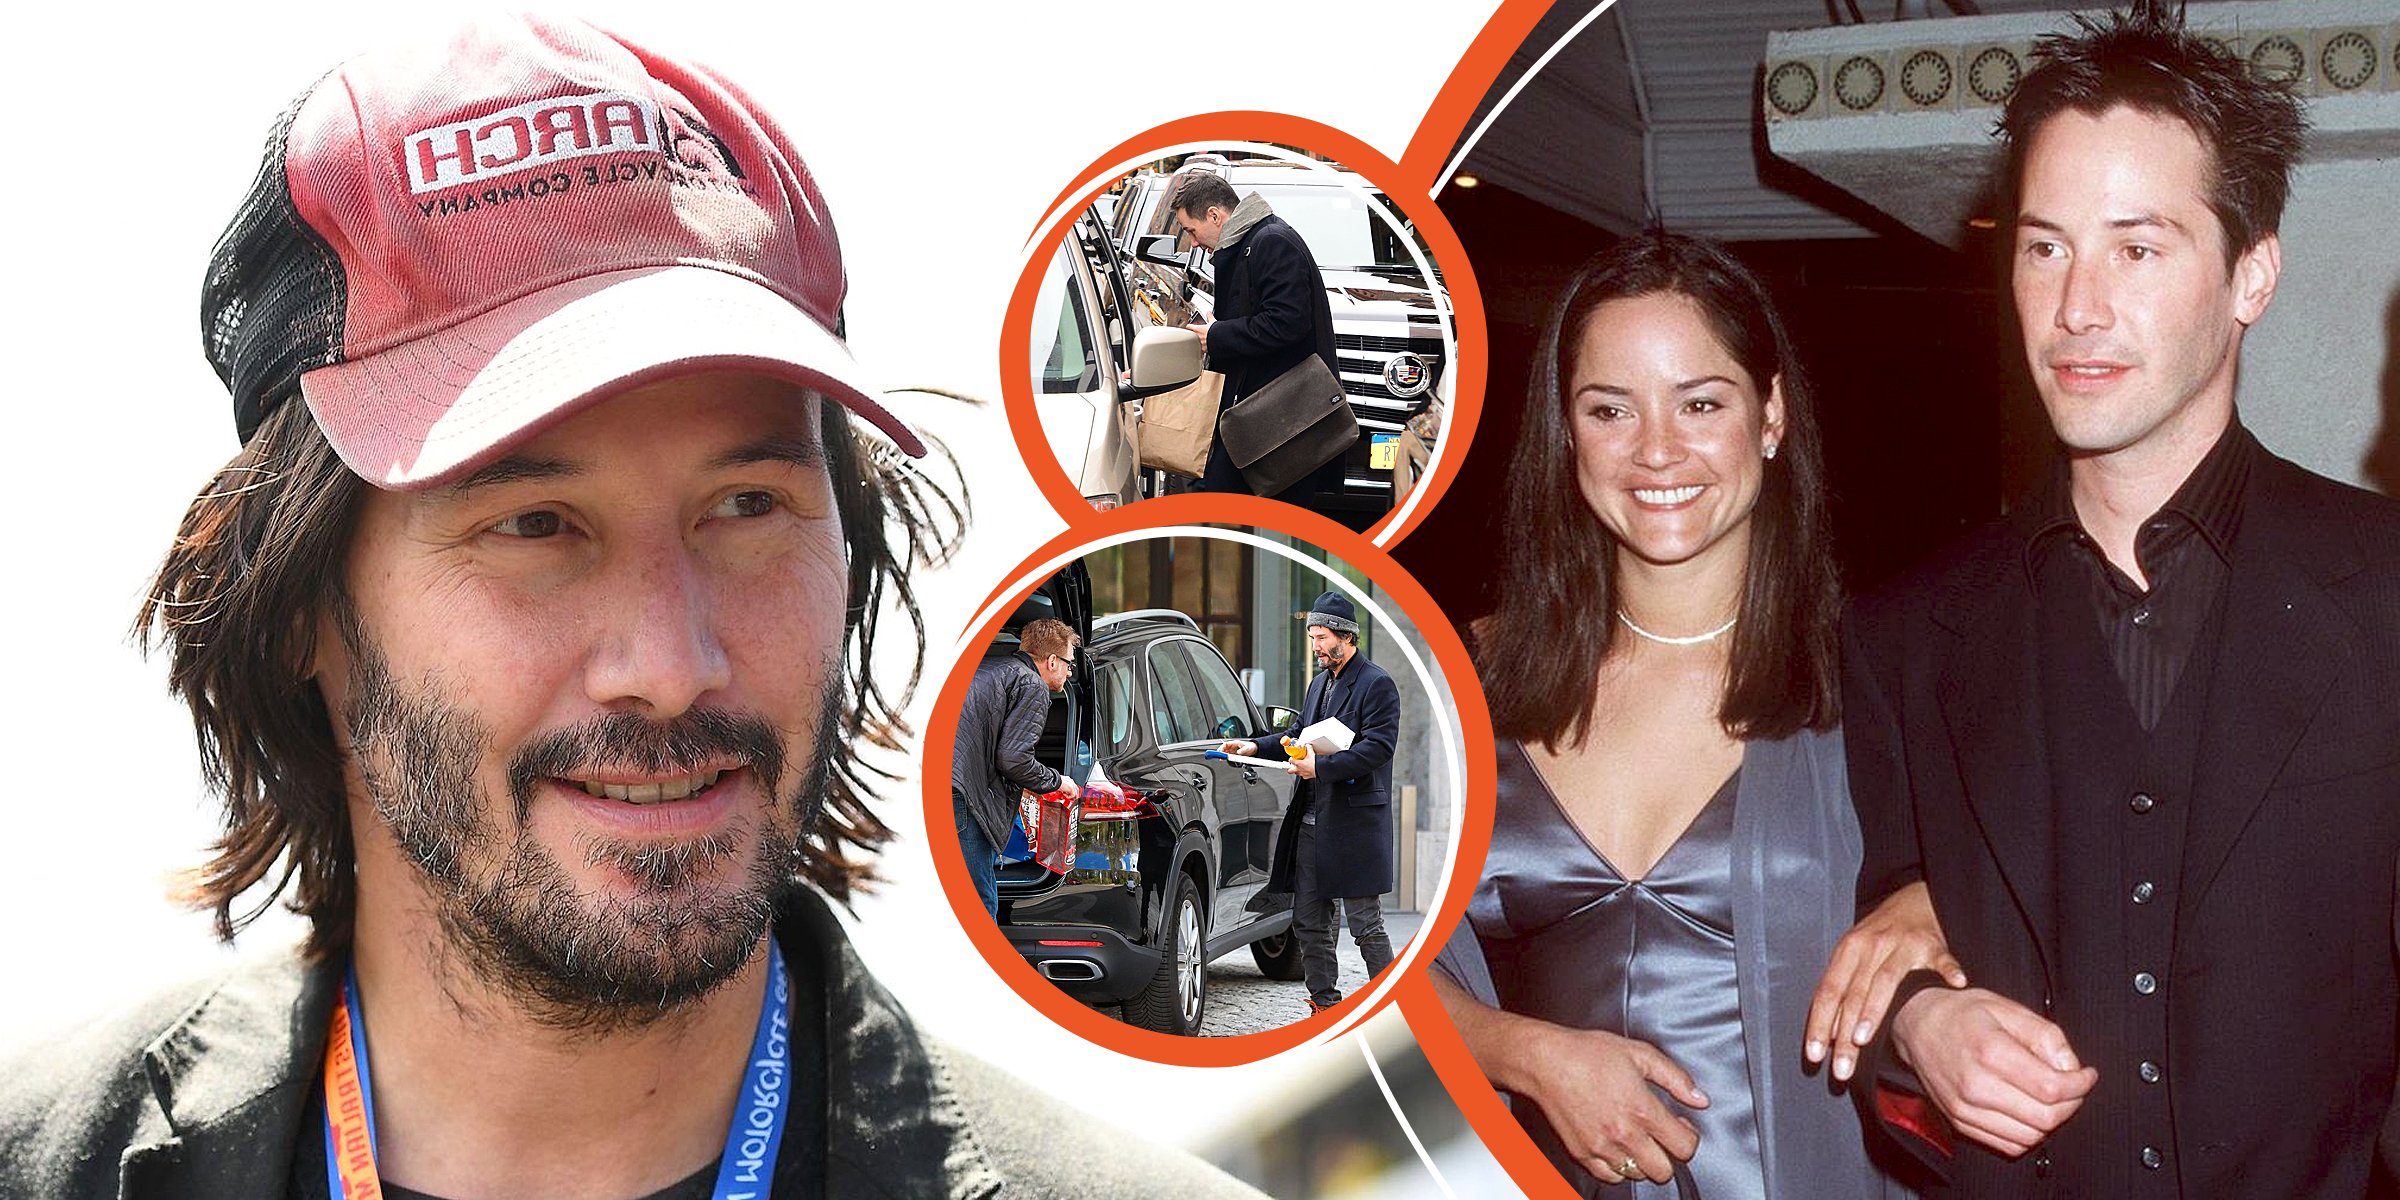 Keanu Reeves | Keanu Reeves | Keanu Reeves | Keanu Reeves and Kim Reeves | Source: Getty Images